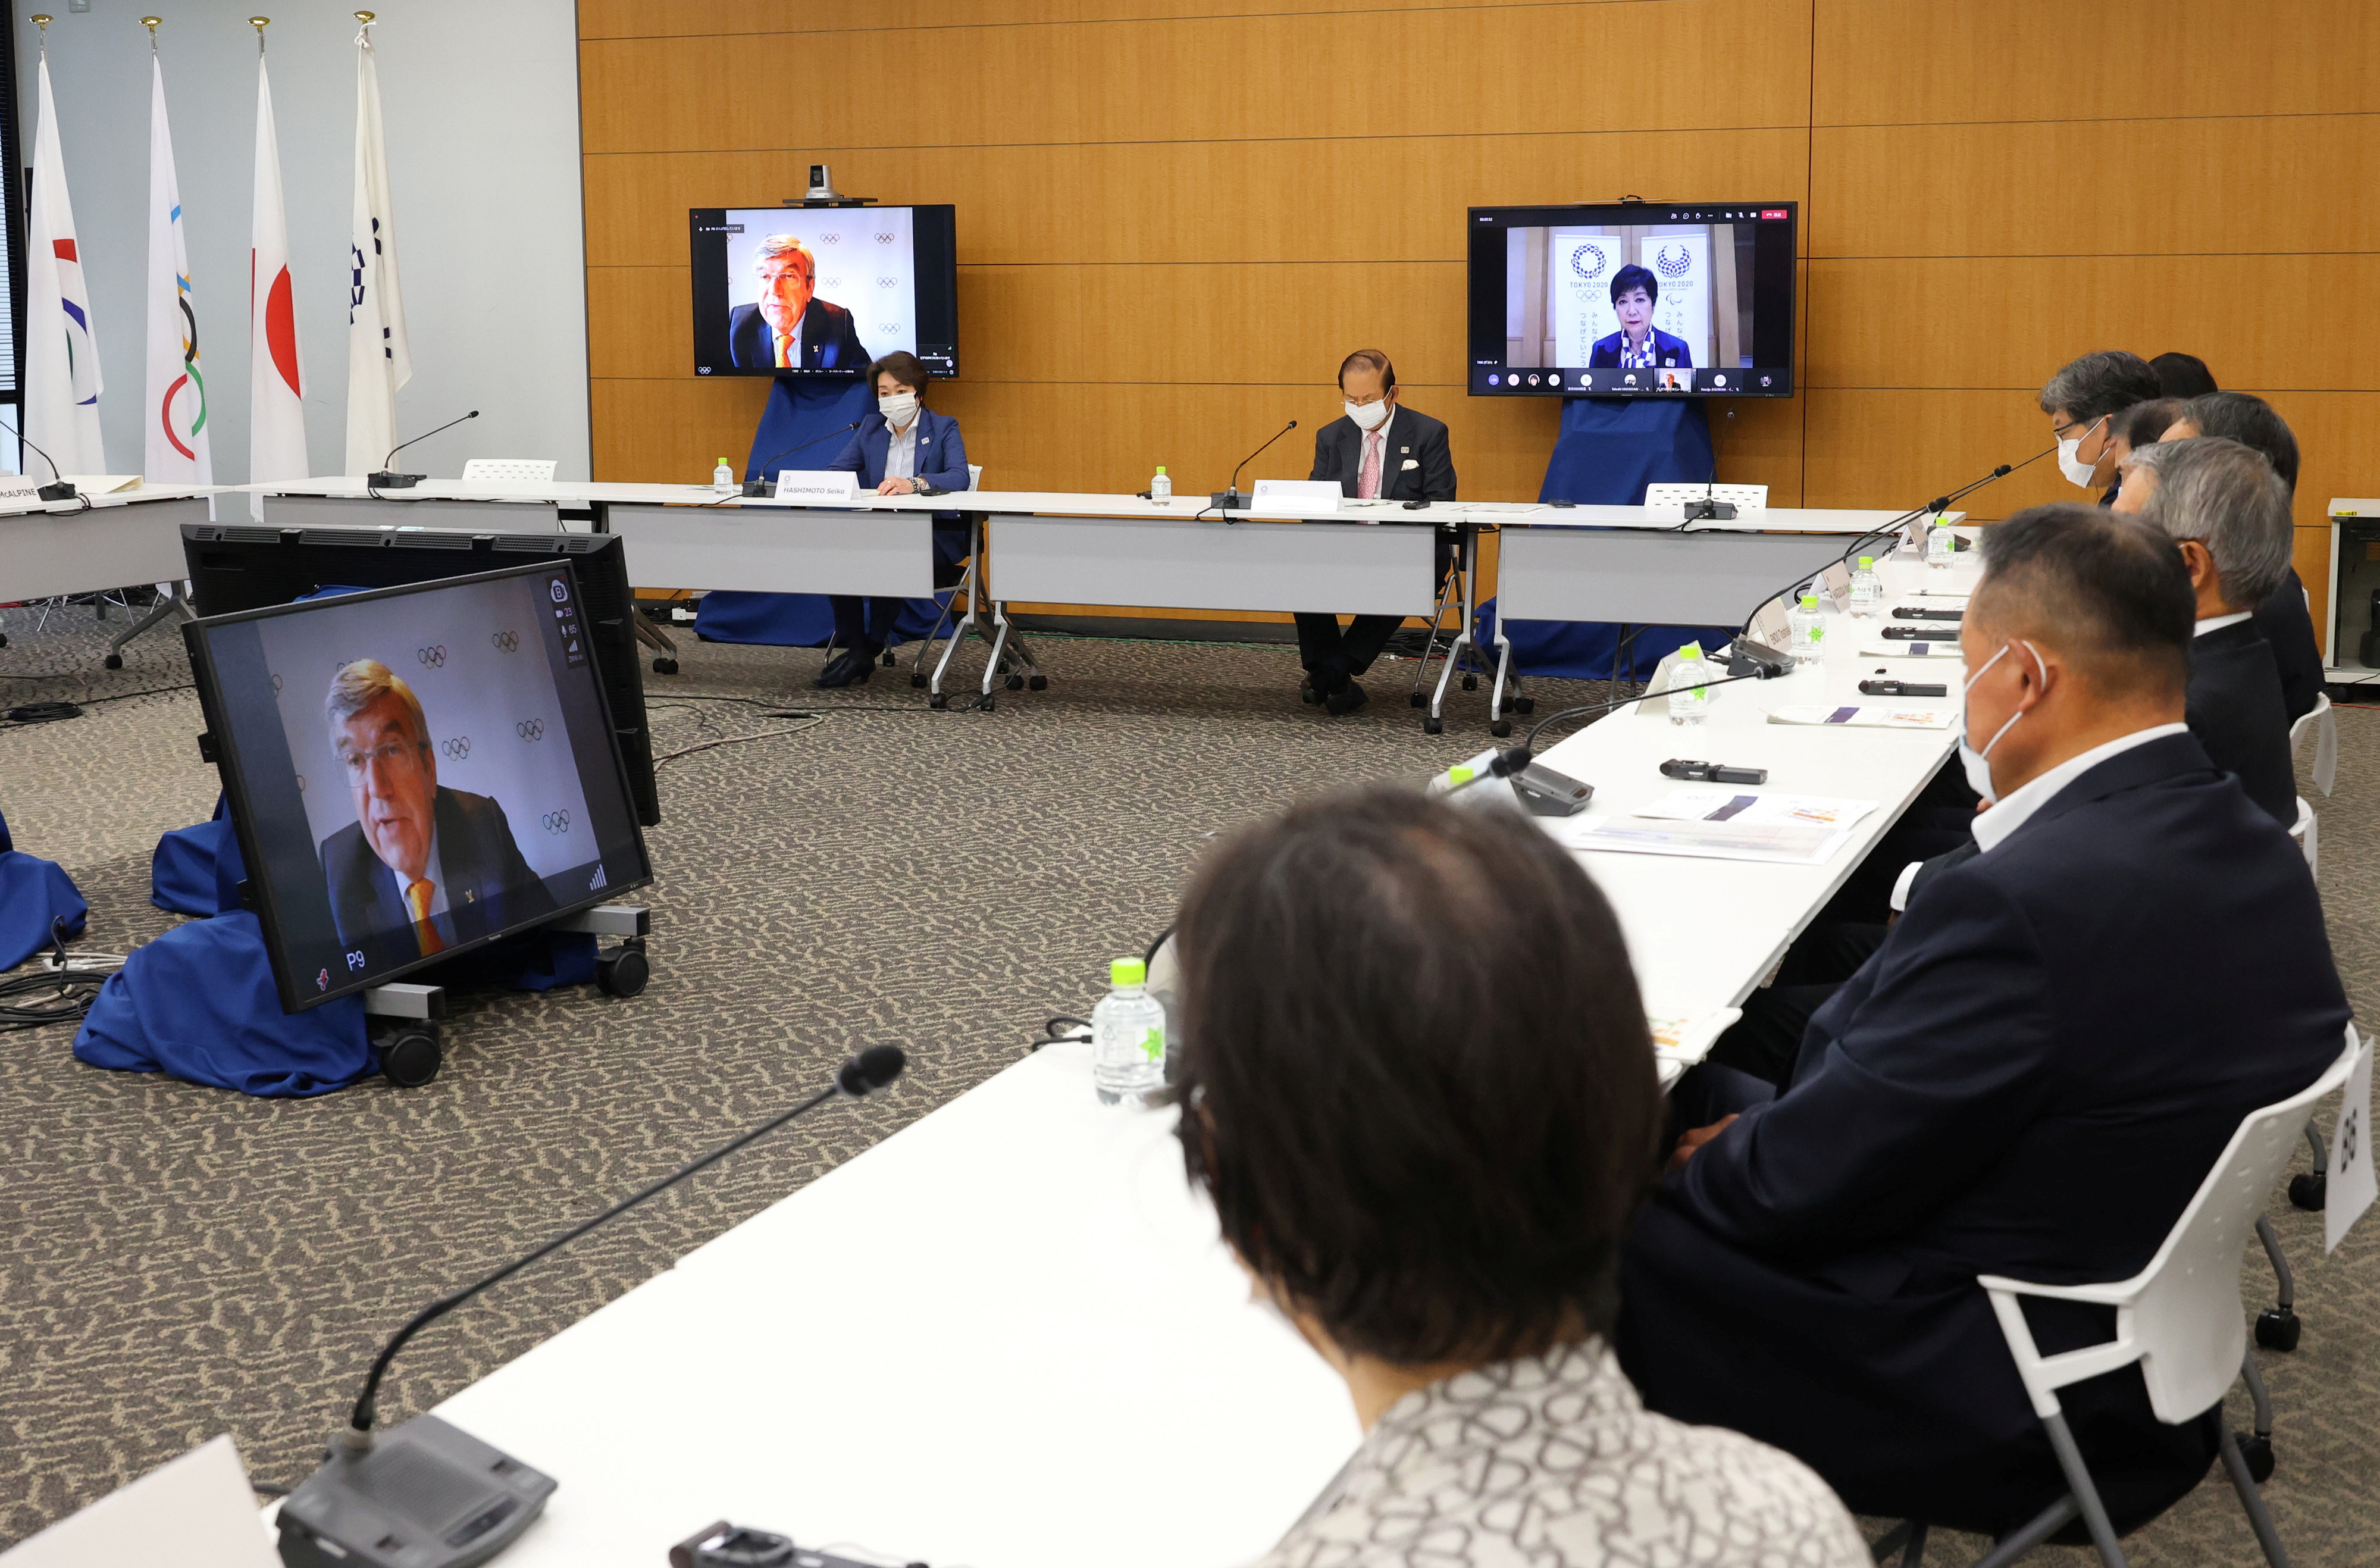 International Olympic Committee (IOC) president Thomas Bach delivers an opening speech on a screen at a meeting of the IOC Coordination Commission for the Tokyo 2020 Olympics, in Tokyo, Japan, May 19, 2021. Yoshikazu Tsuno/POOL via REUTERS